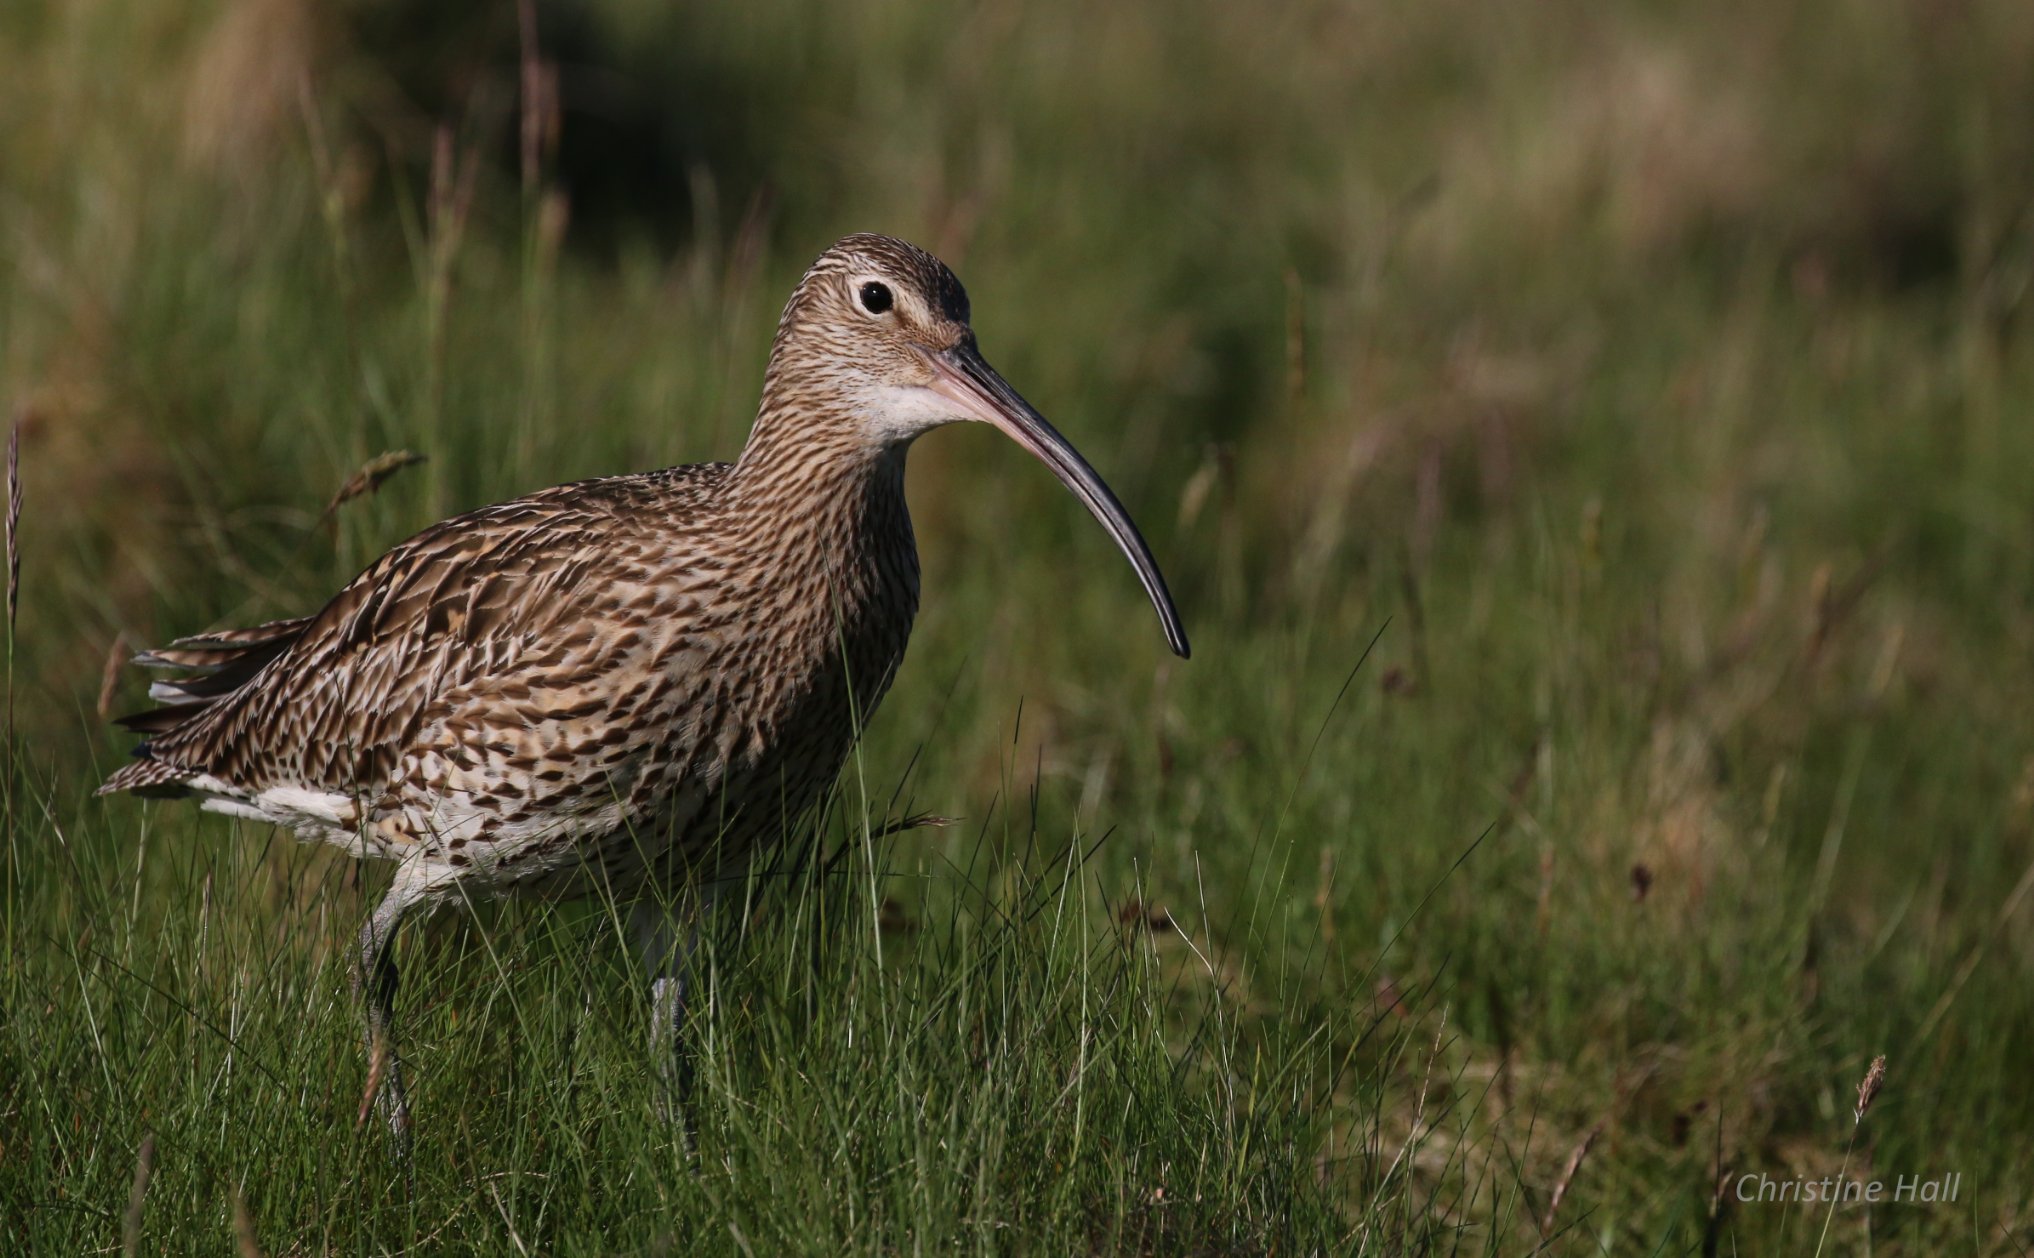 Curlew in Orkney - image by Christine Hall